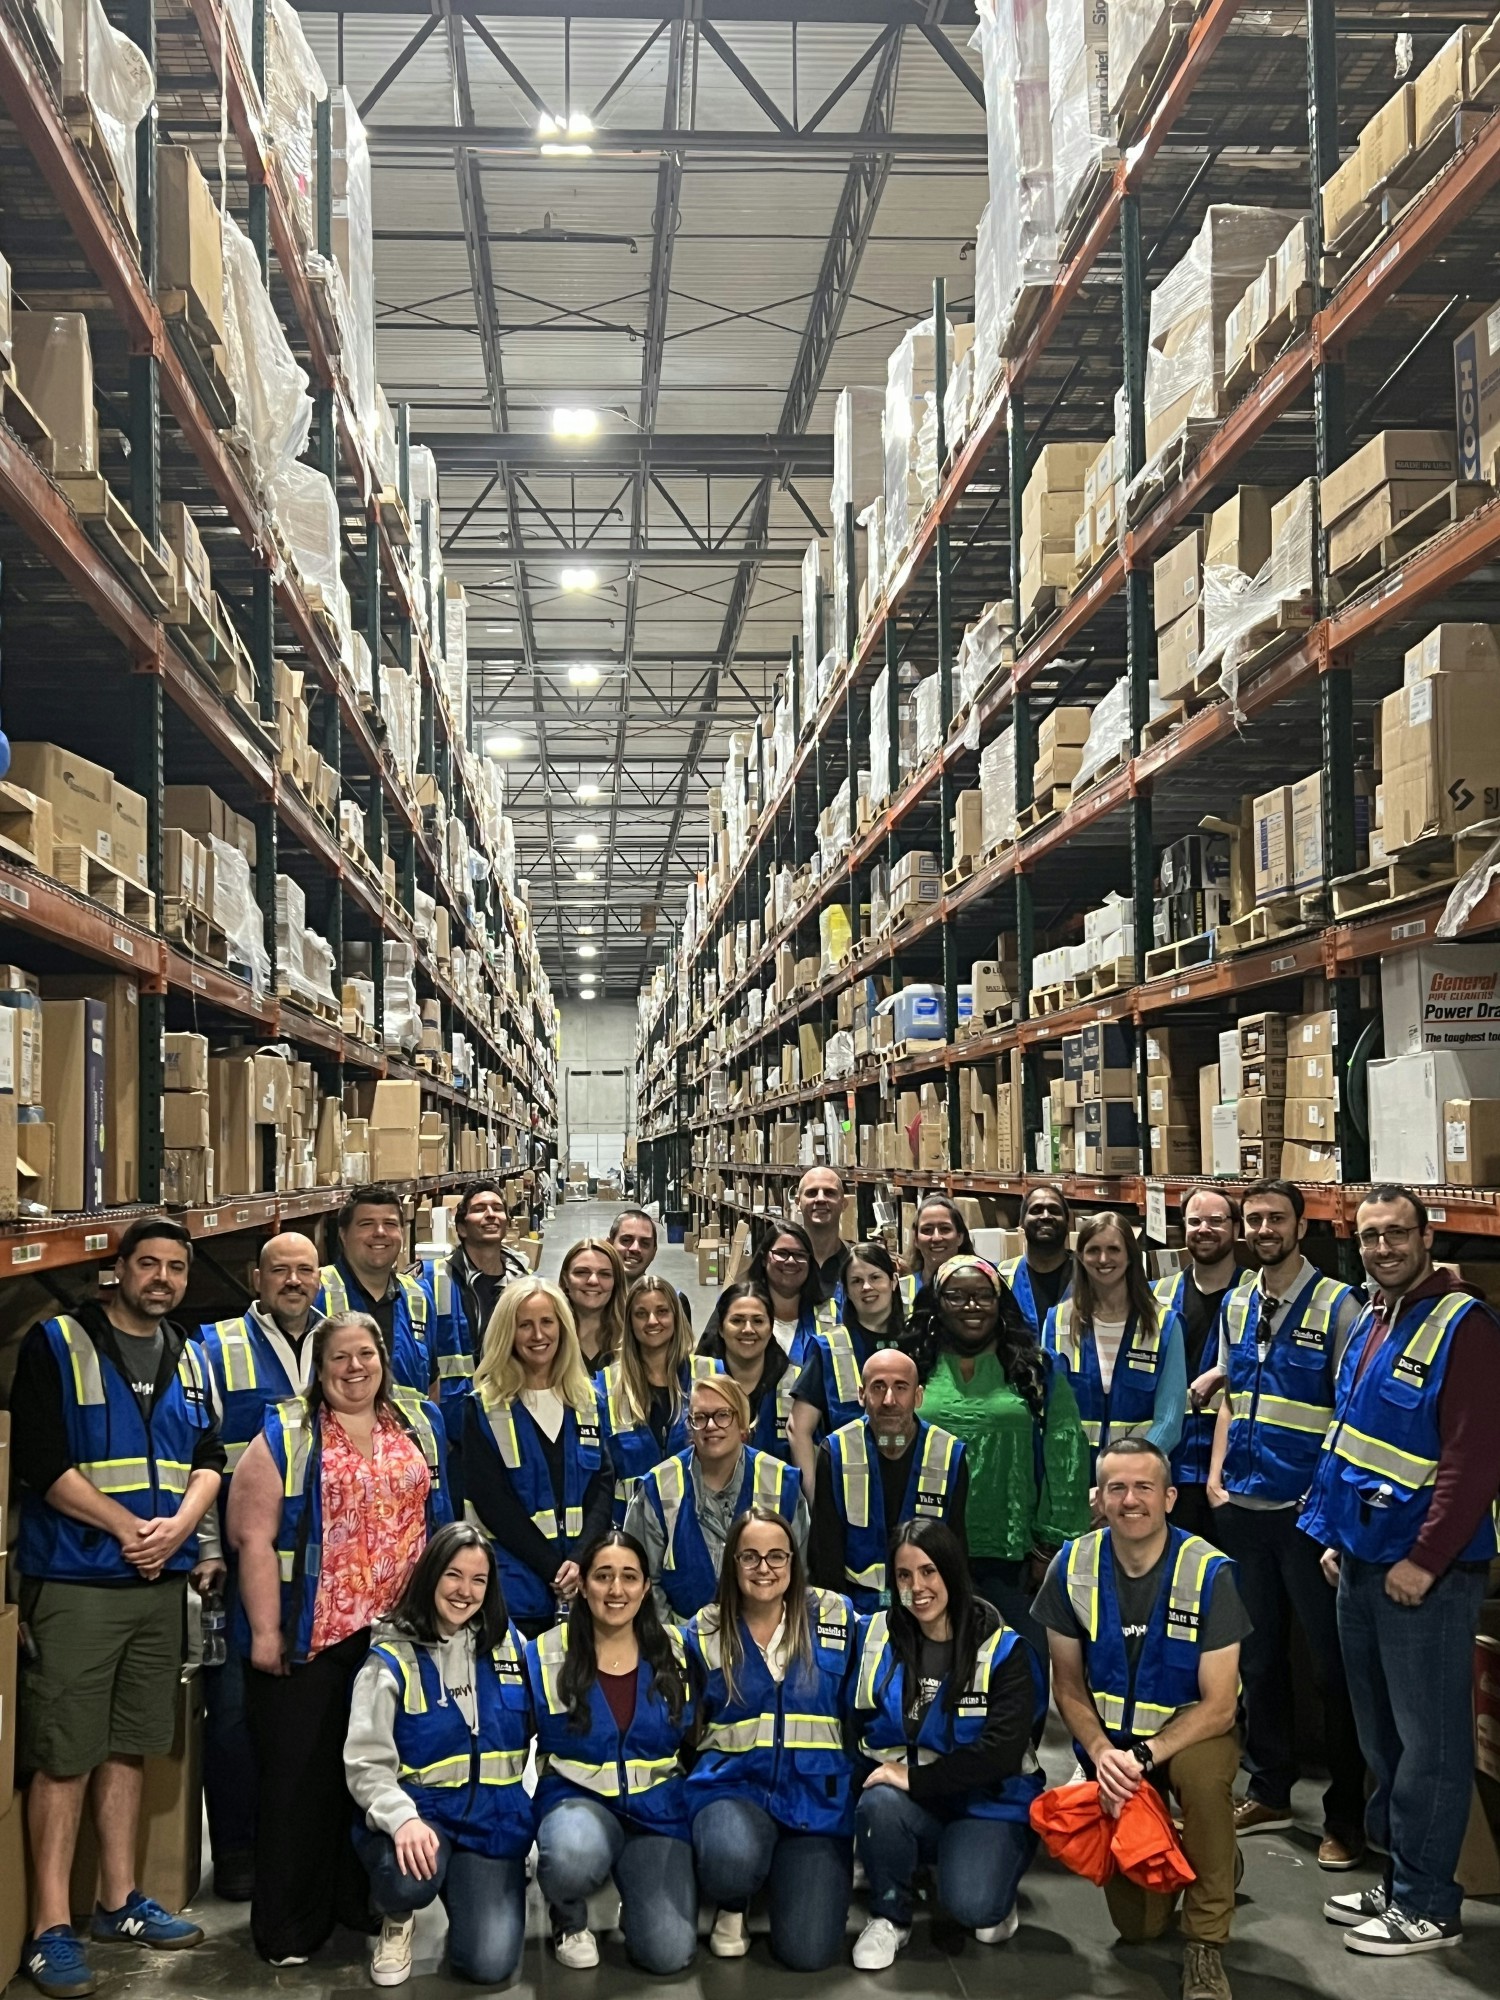 The leadership team visiting our Fulfillment Center in Cranbury, NJ! 